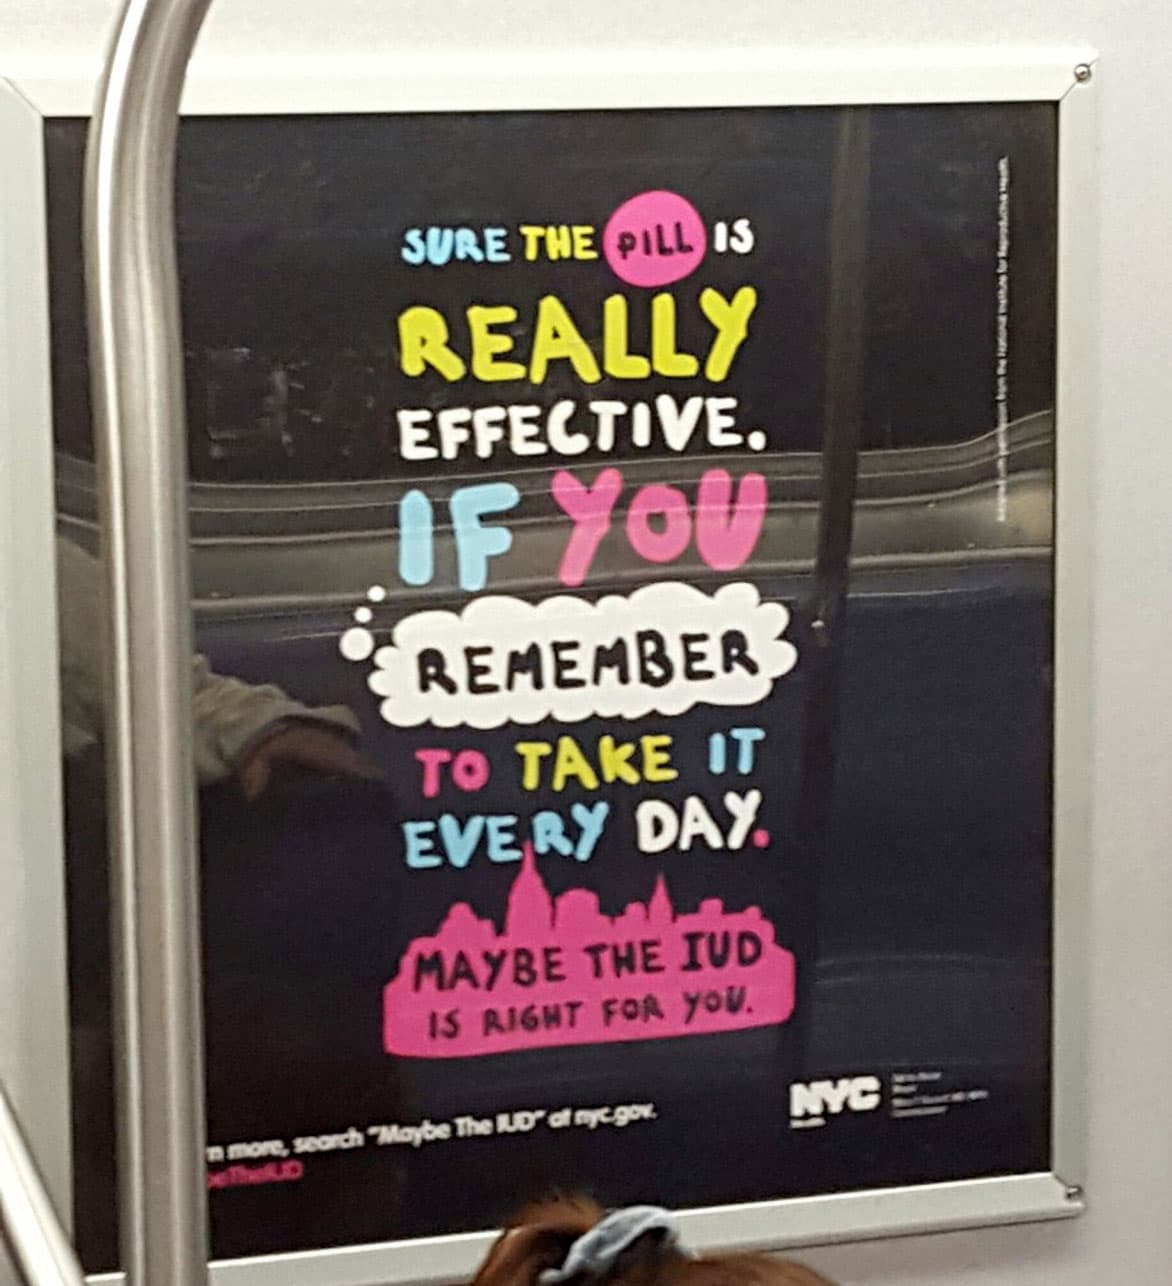 A New York City subway sign that is part of the new "Maybe the IUD" campaign (Courtesy of Dr. Deborah Kaplan)